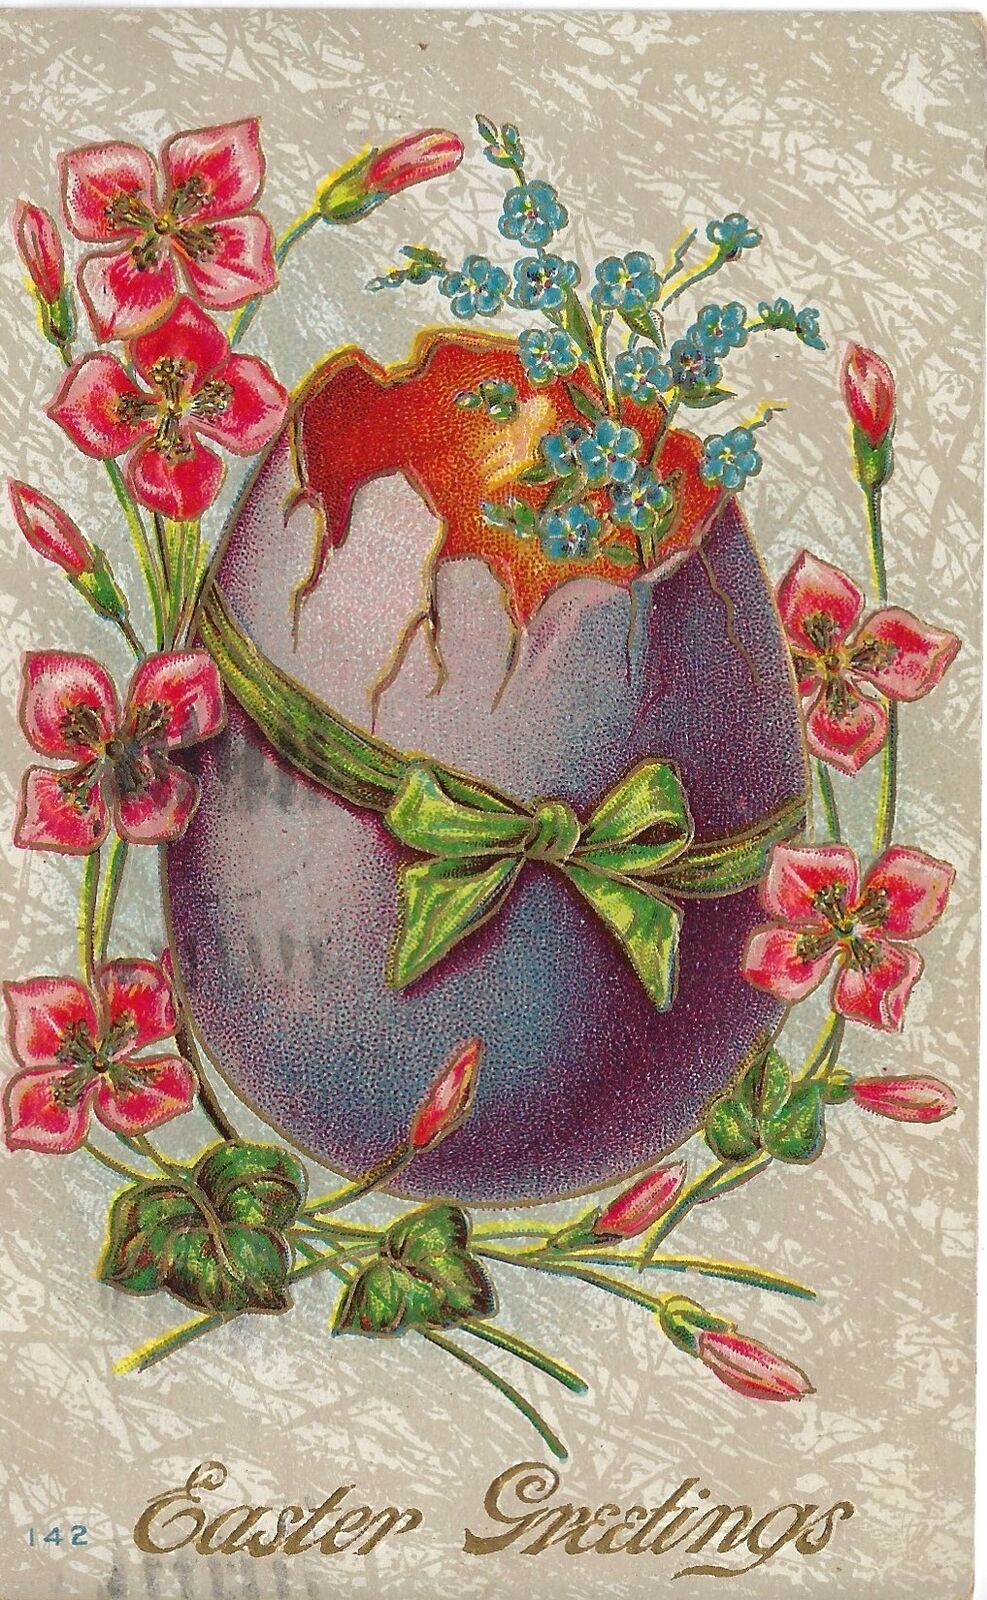 Easter Greetings Large Egg with Florals Embossed Antique Postcard 1910